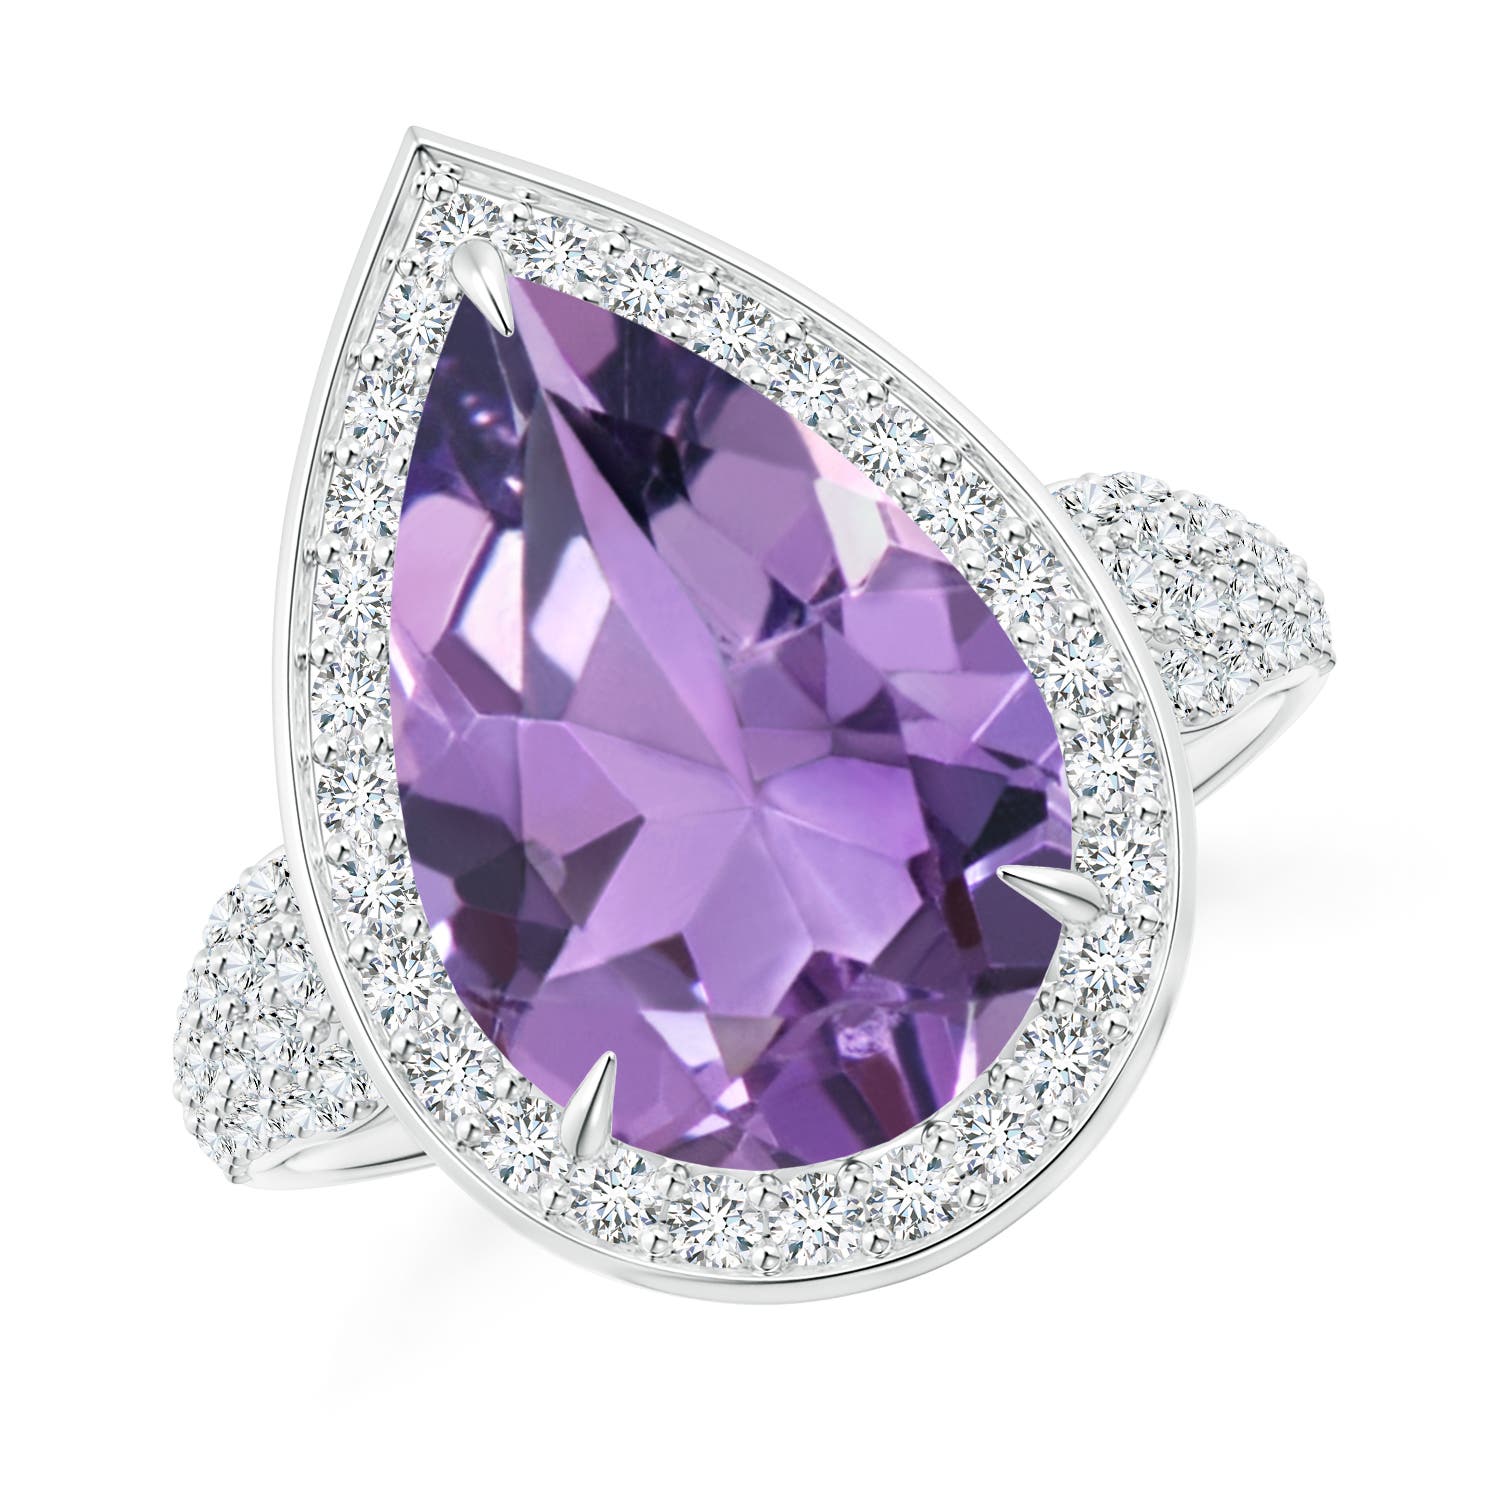 A - Amethyst / 5.48 CT / 14 KT White Gold